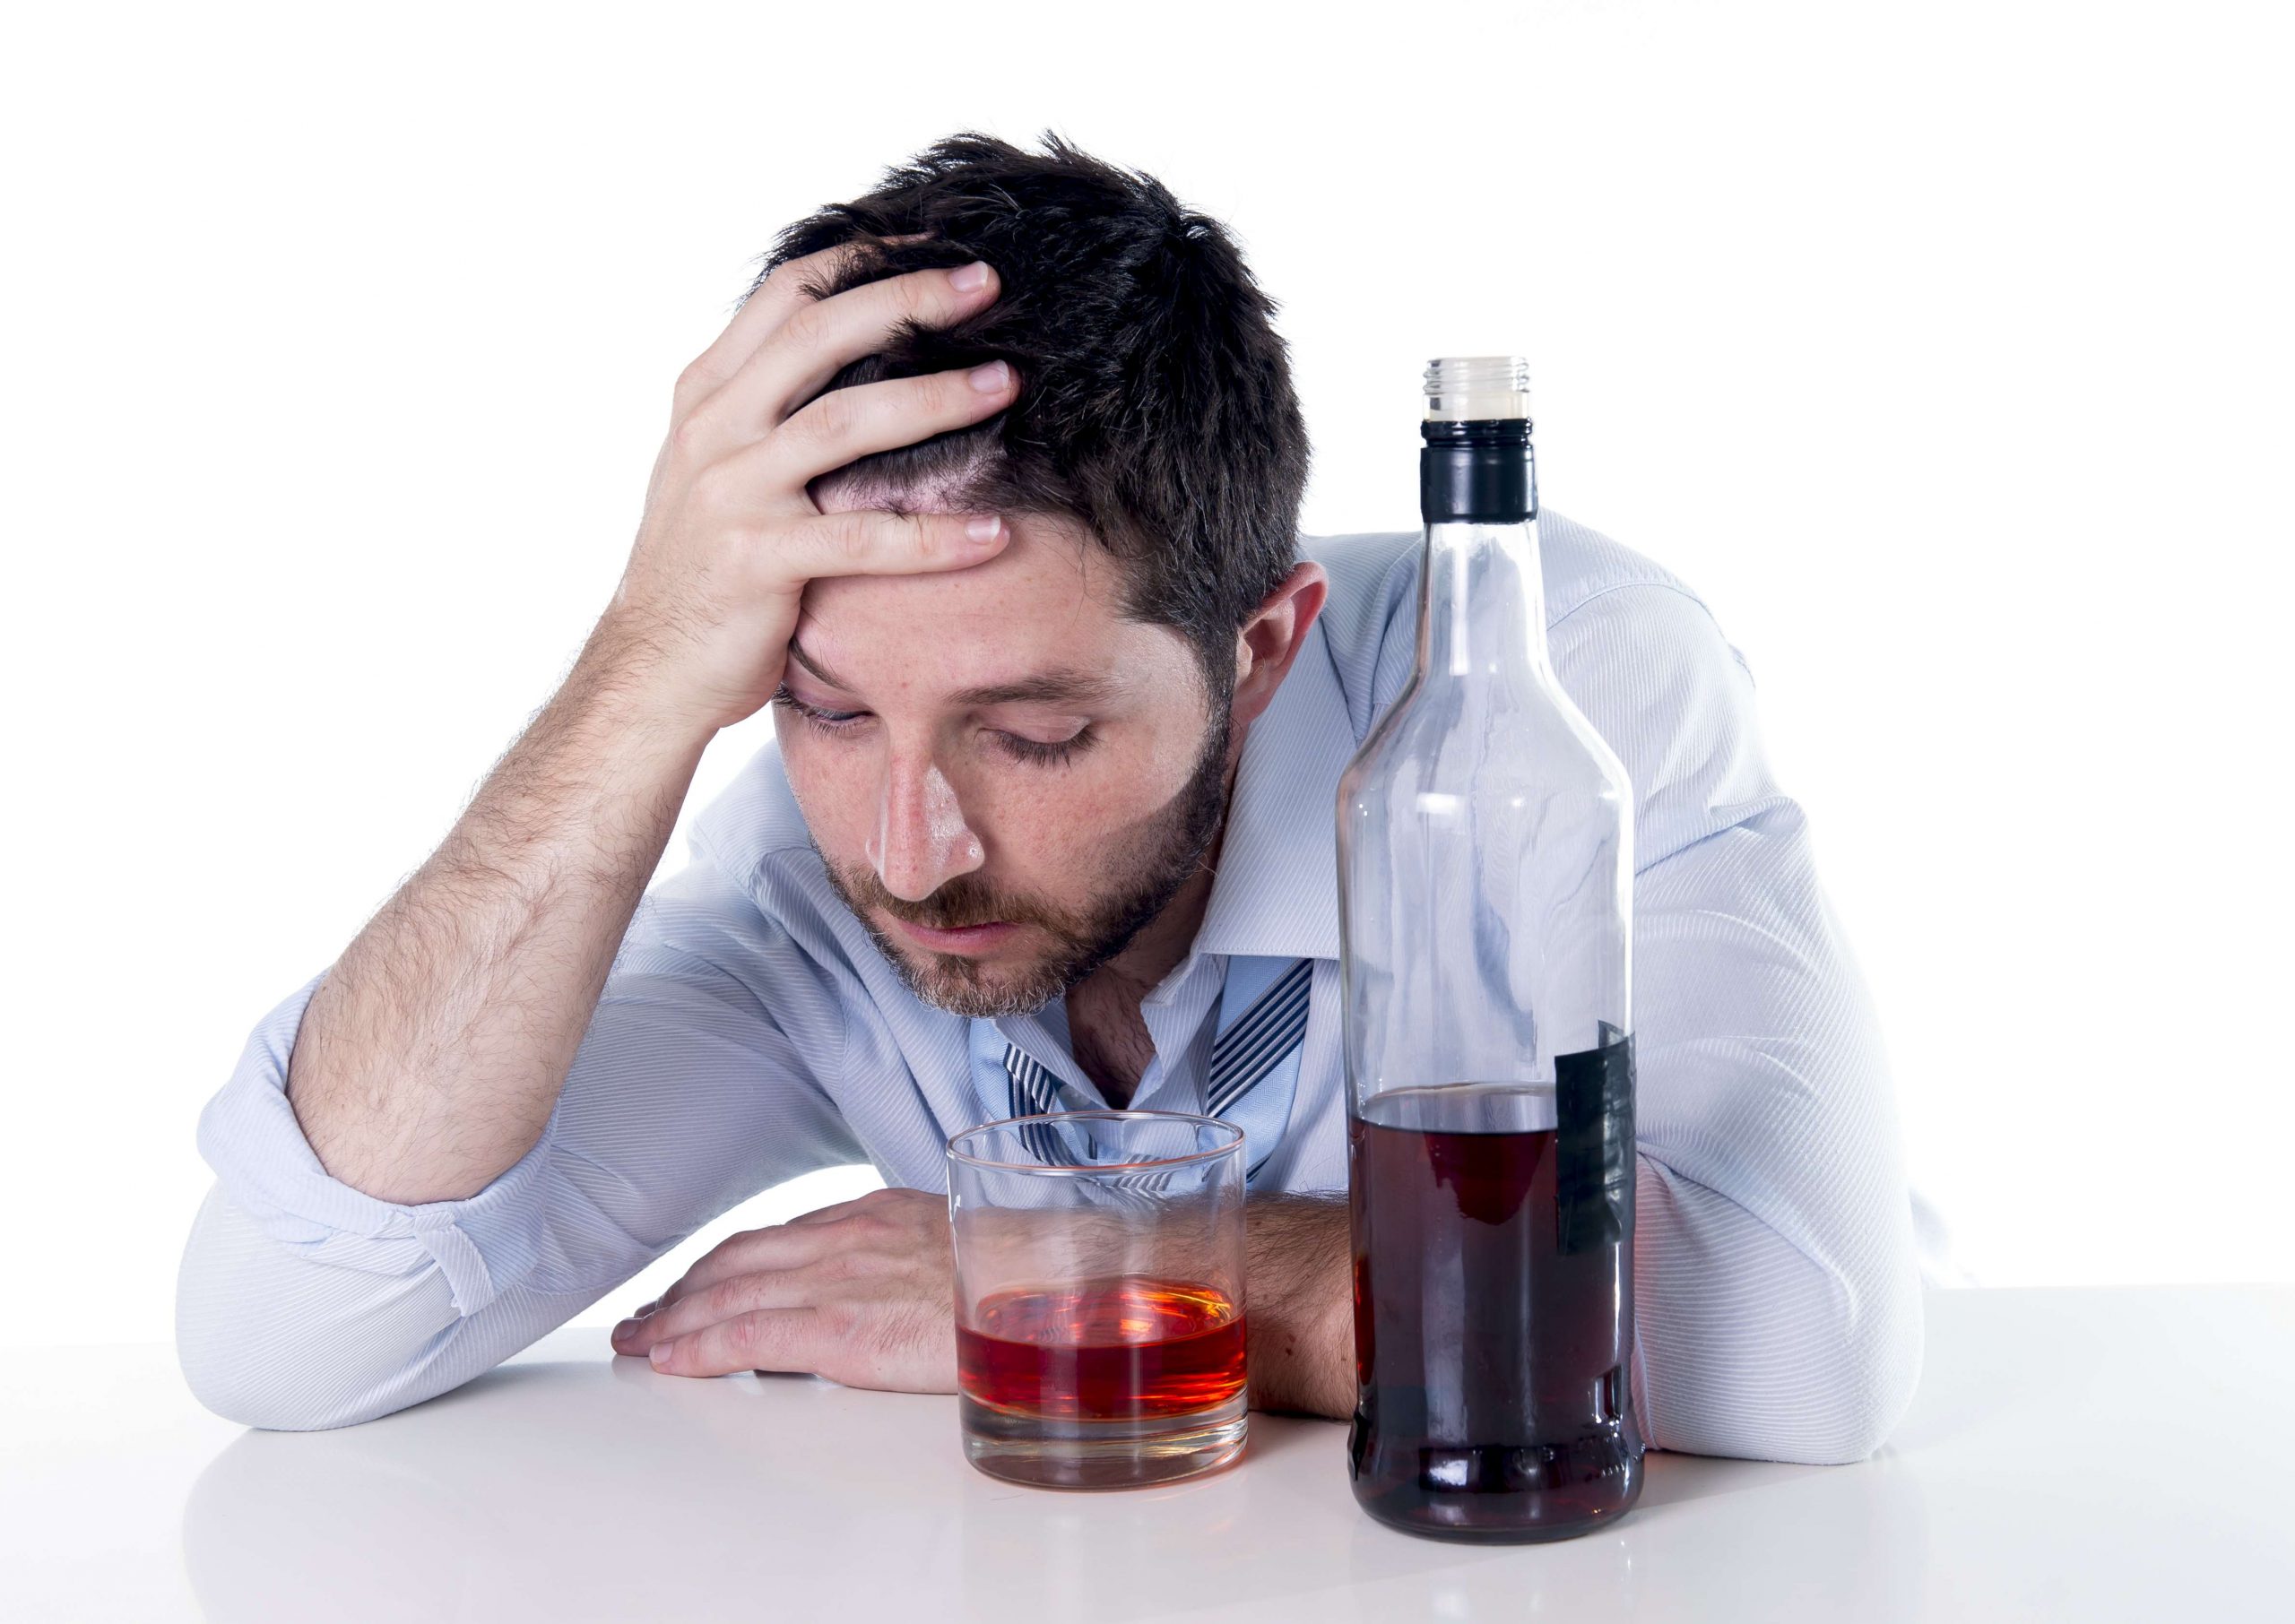 detox side effects from alcohol